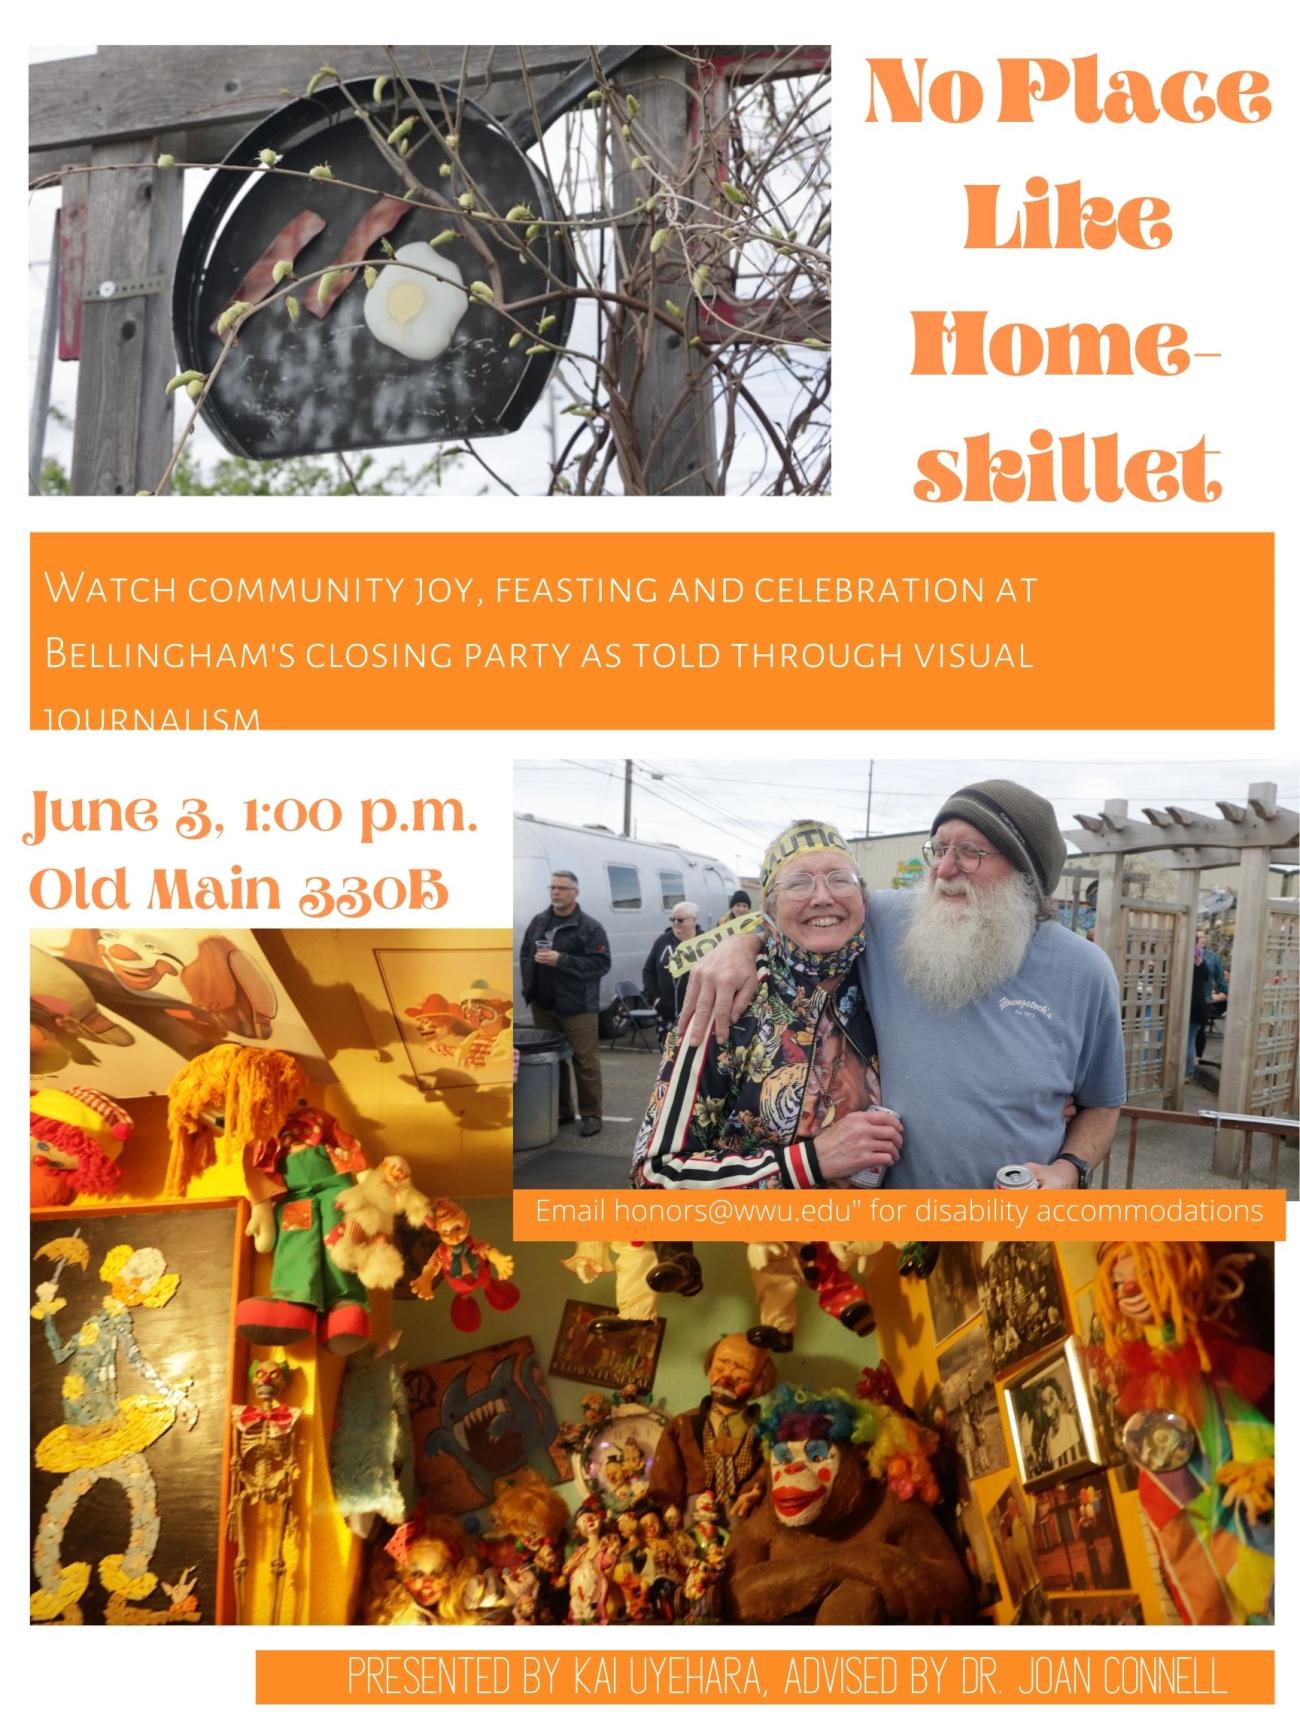 A white poster with orange accents. There are pictures of two people, a skillet, and a collection of items. The text reads: "No Place Like Home-Skillet. Watch community joy, feasting and celebration at Bellingham's close party as told through visual journalism. June 3, 1:00 pm. Old Main 330B. Presented by Kai Uyehara, Advised by Dr. Joan Connel."